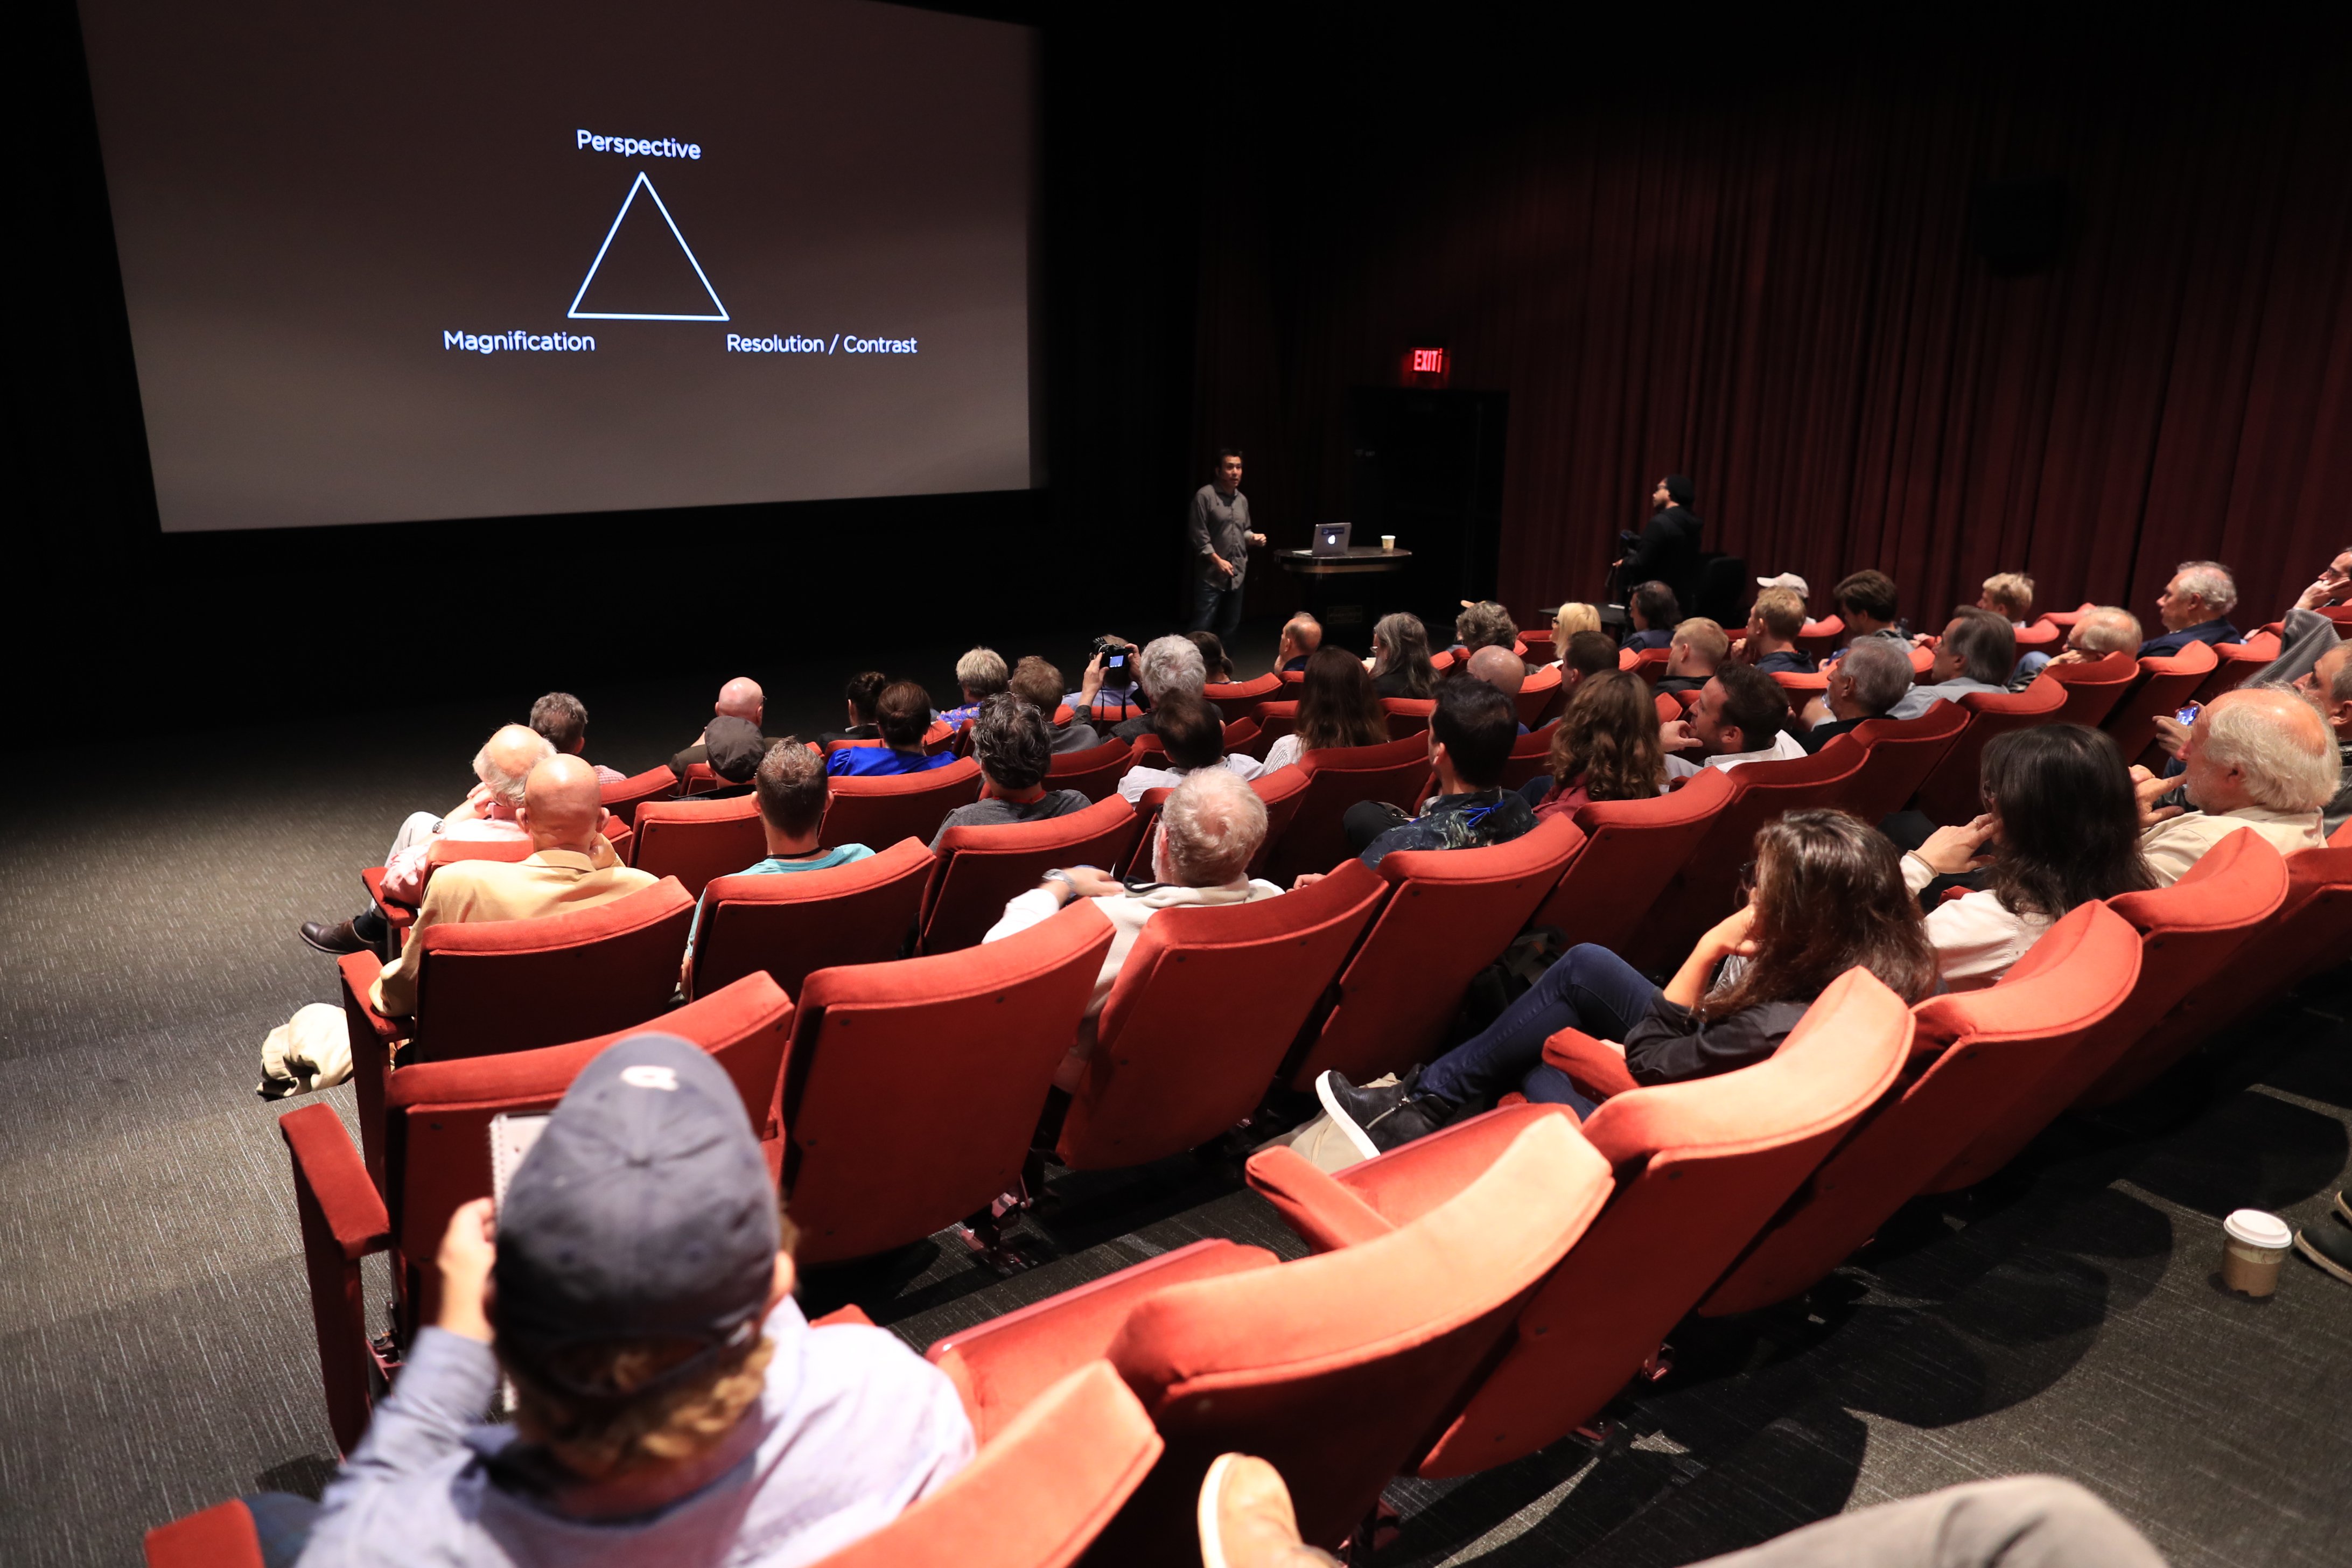 Dan Sasaki, Panavision’s Vice President of Optical Engineering, leads the discussion at the Tak Miyagishima Theater. Photo by James Neihouse, ASC